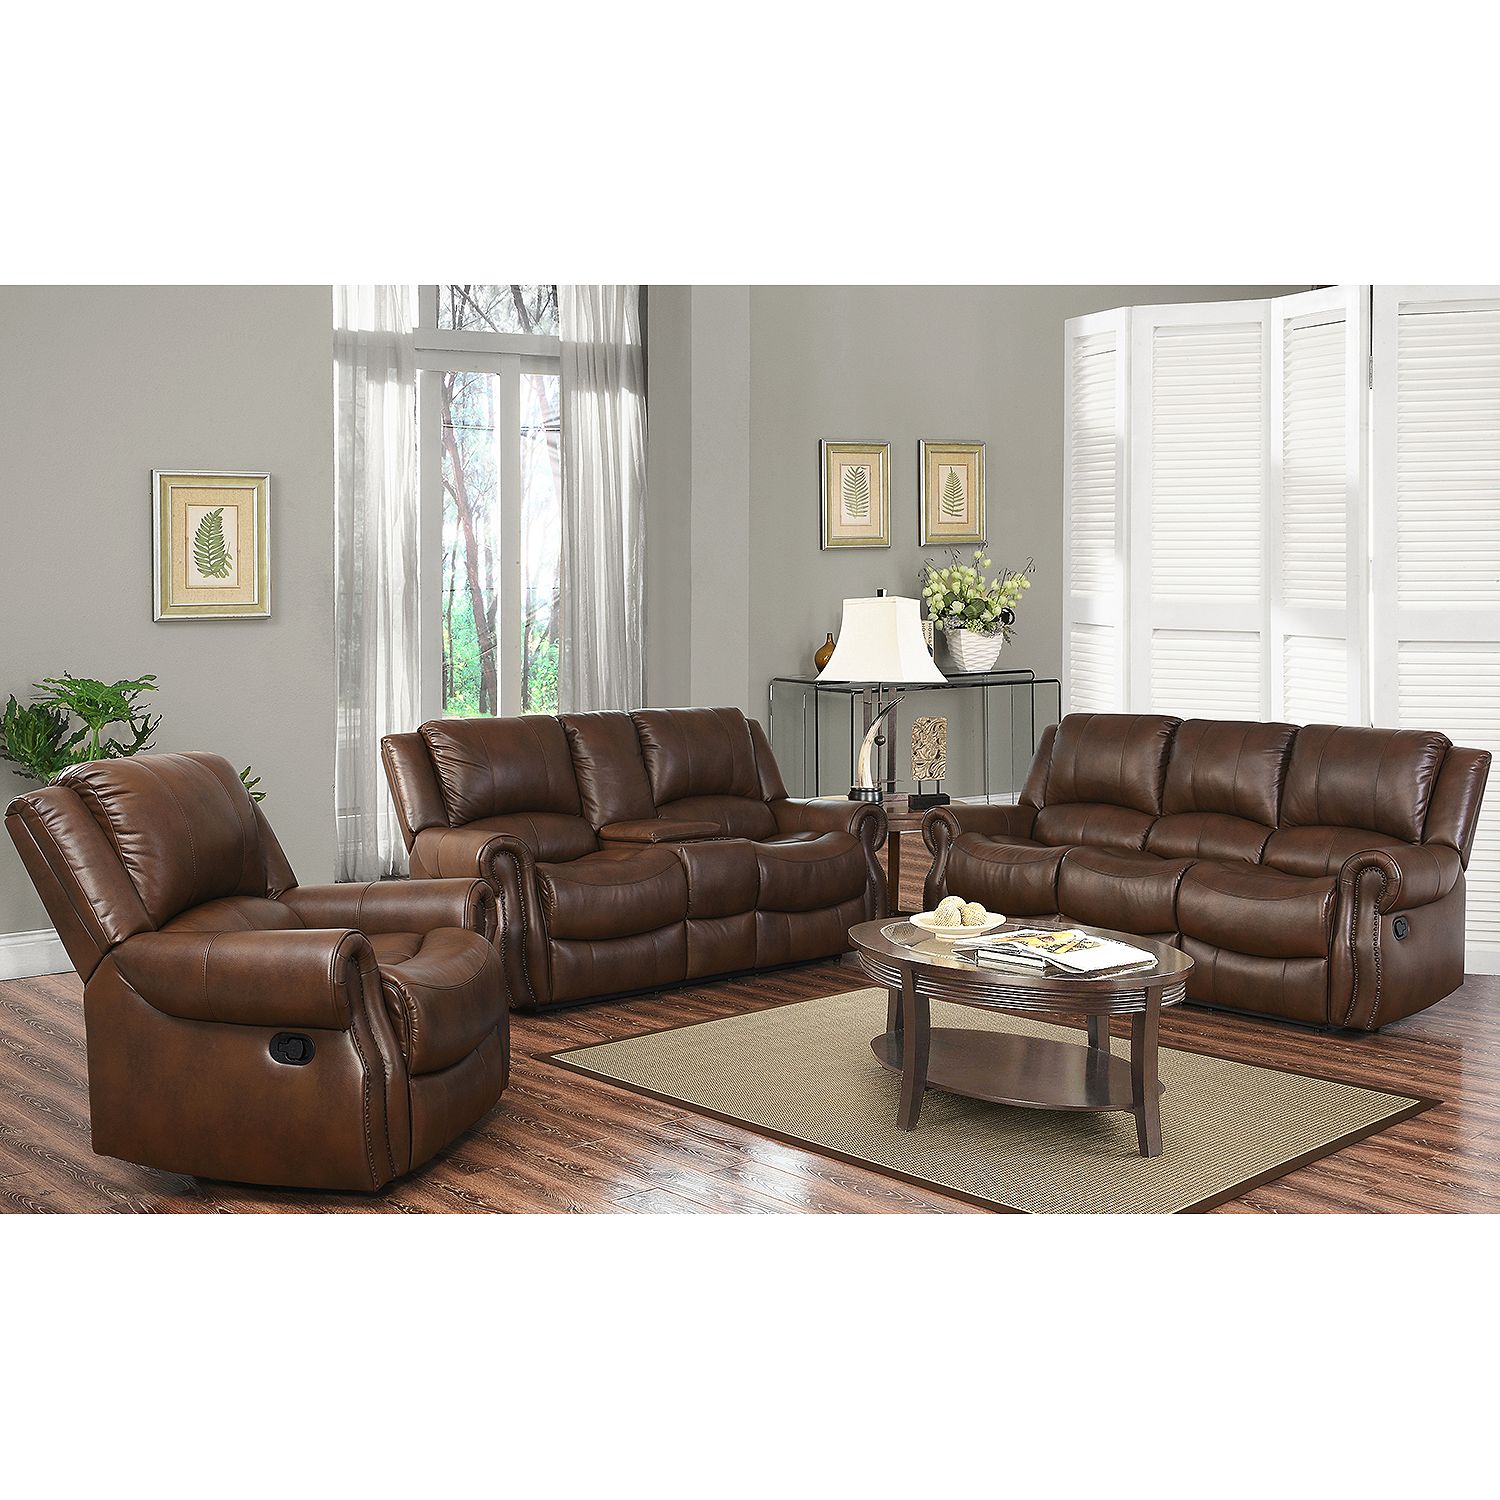 Harvest Reclining Sofa, Loveseat and Chair Set